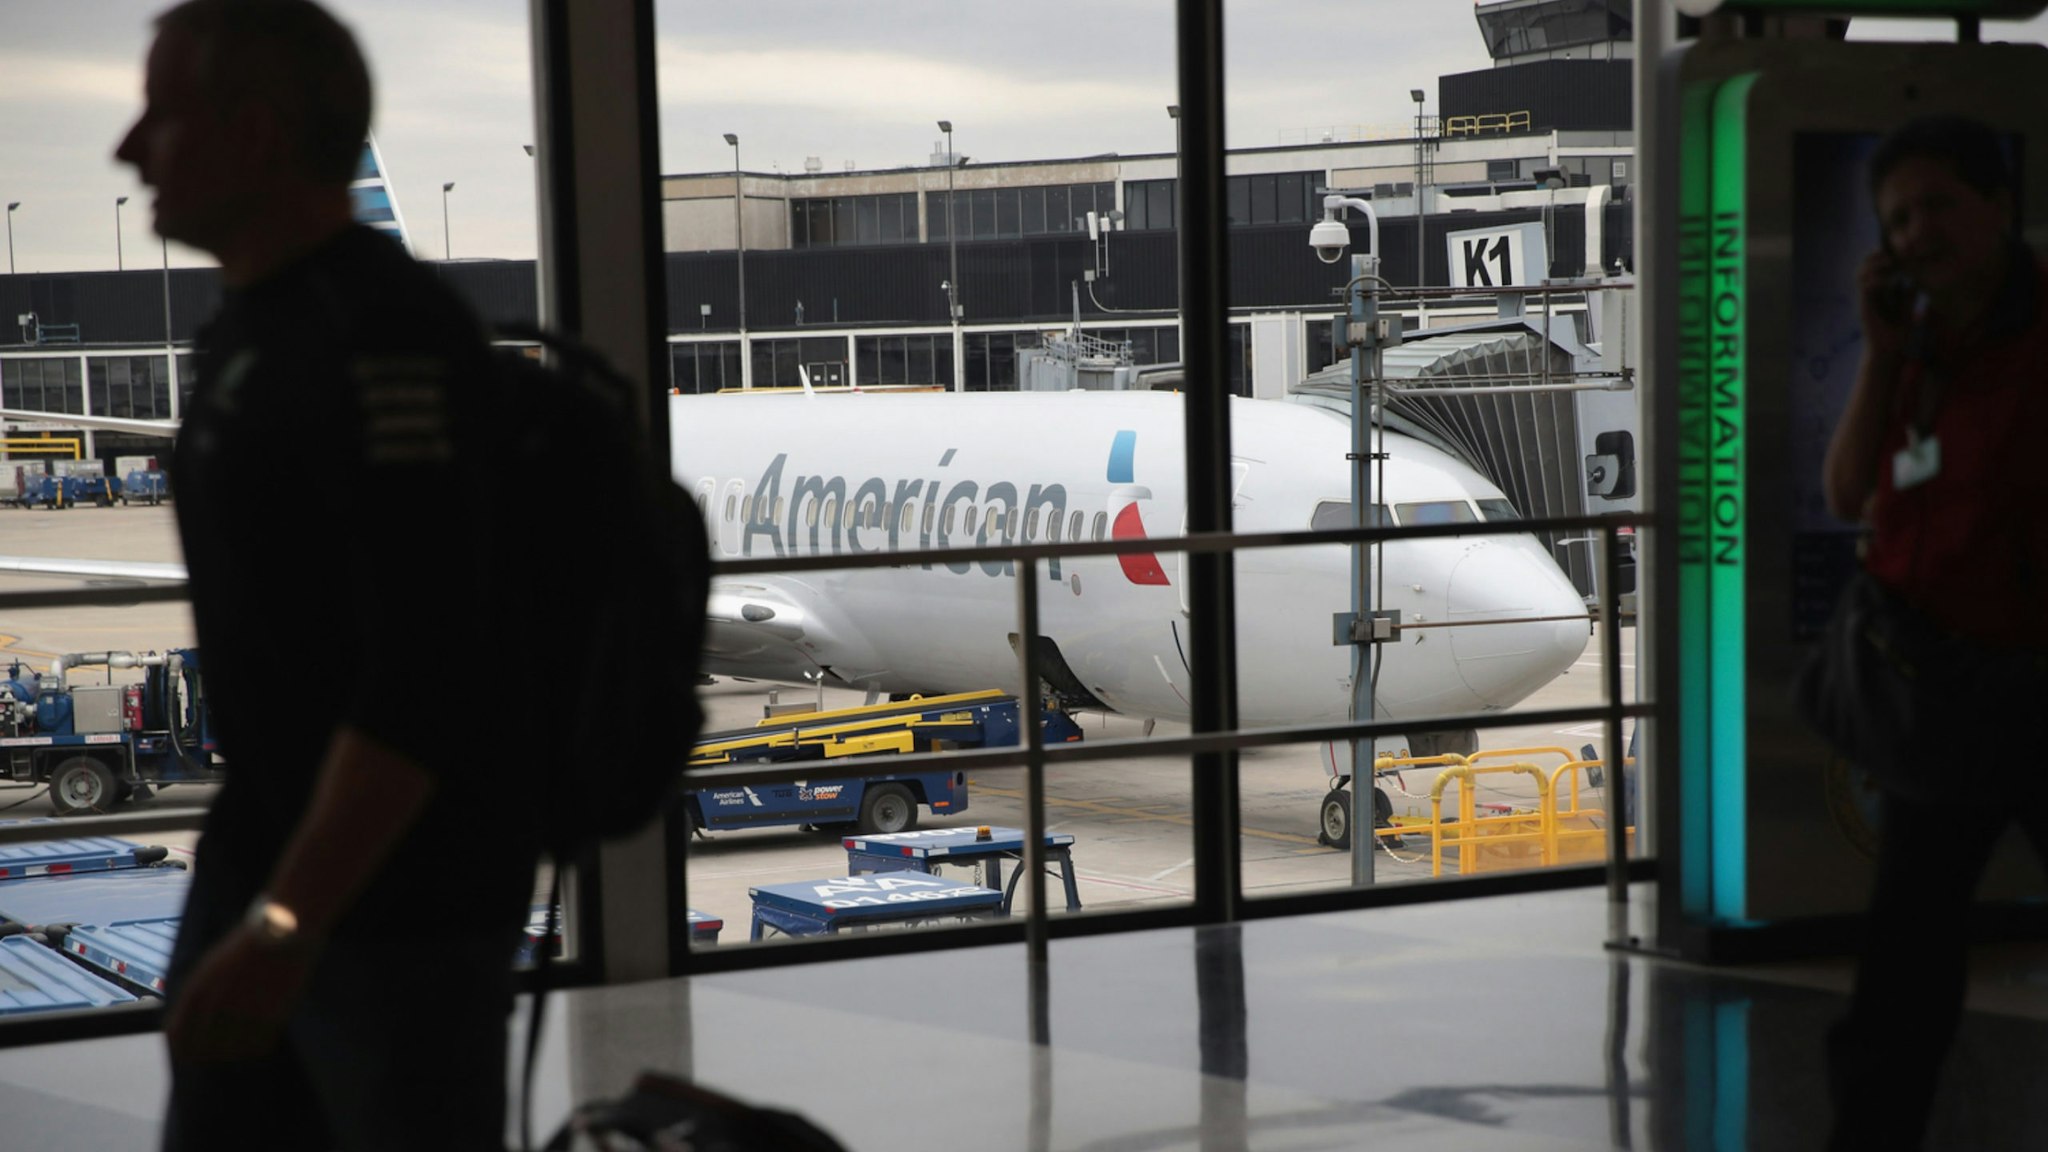 An American Airlines aricraft sits at a gate at O'Hare International Airport on May 11, 2018 in Chicago, Illinois.